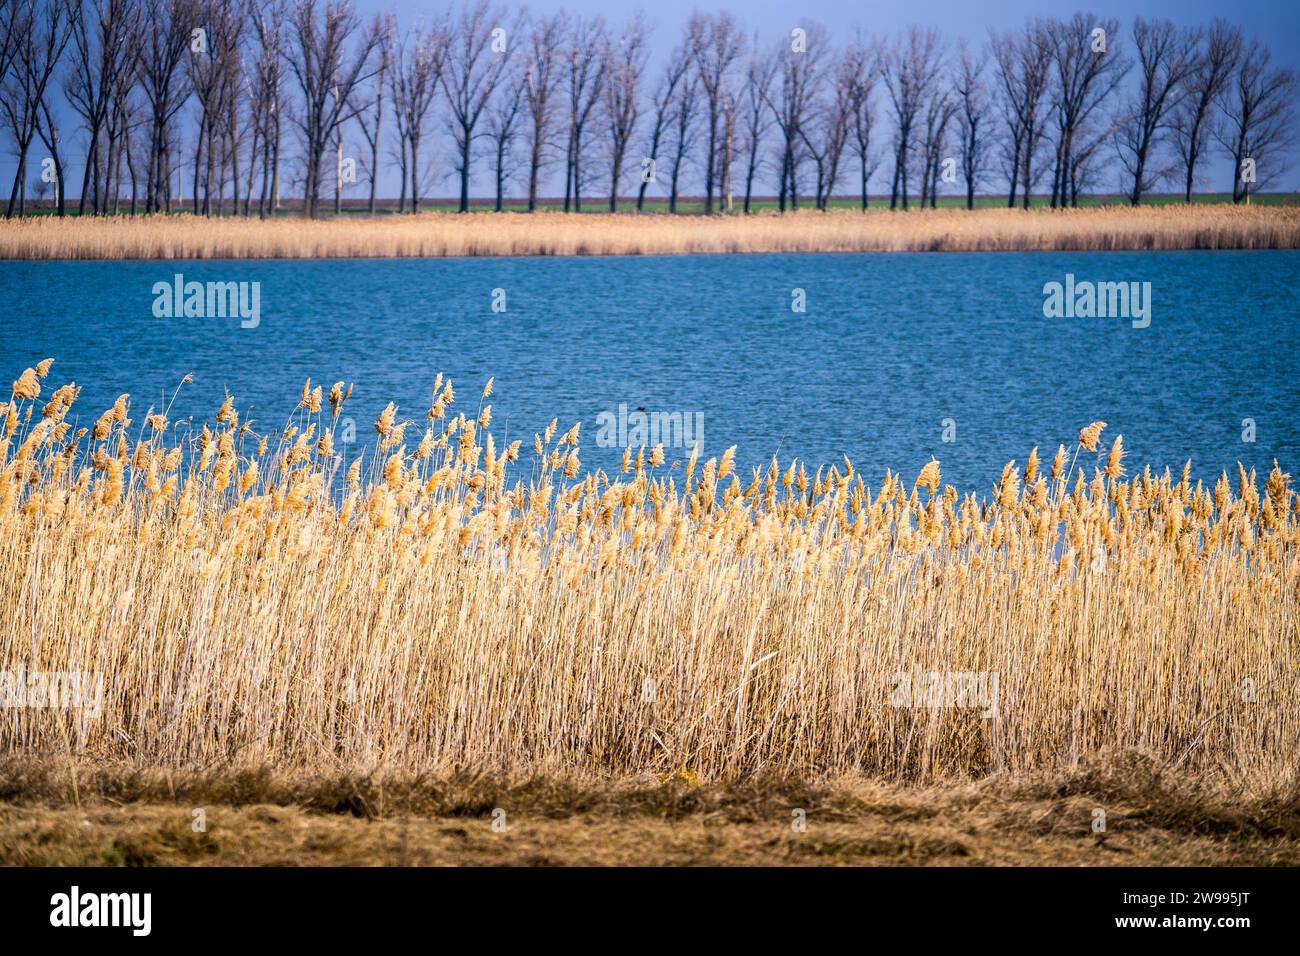 The tranquil waters of a lake in the background, surrounded by tall reeds. Stock Photo